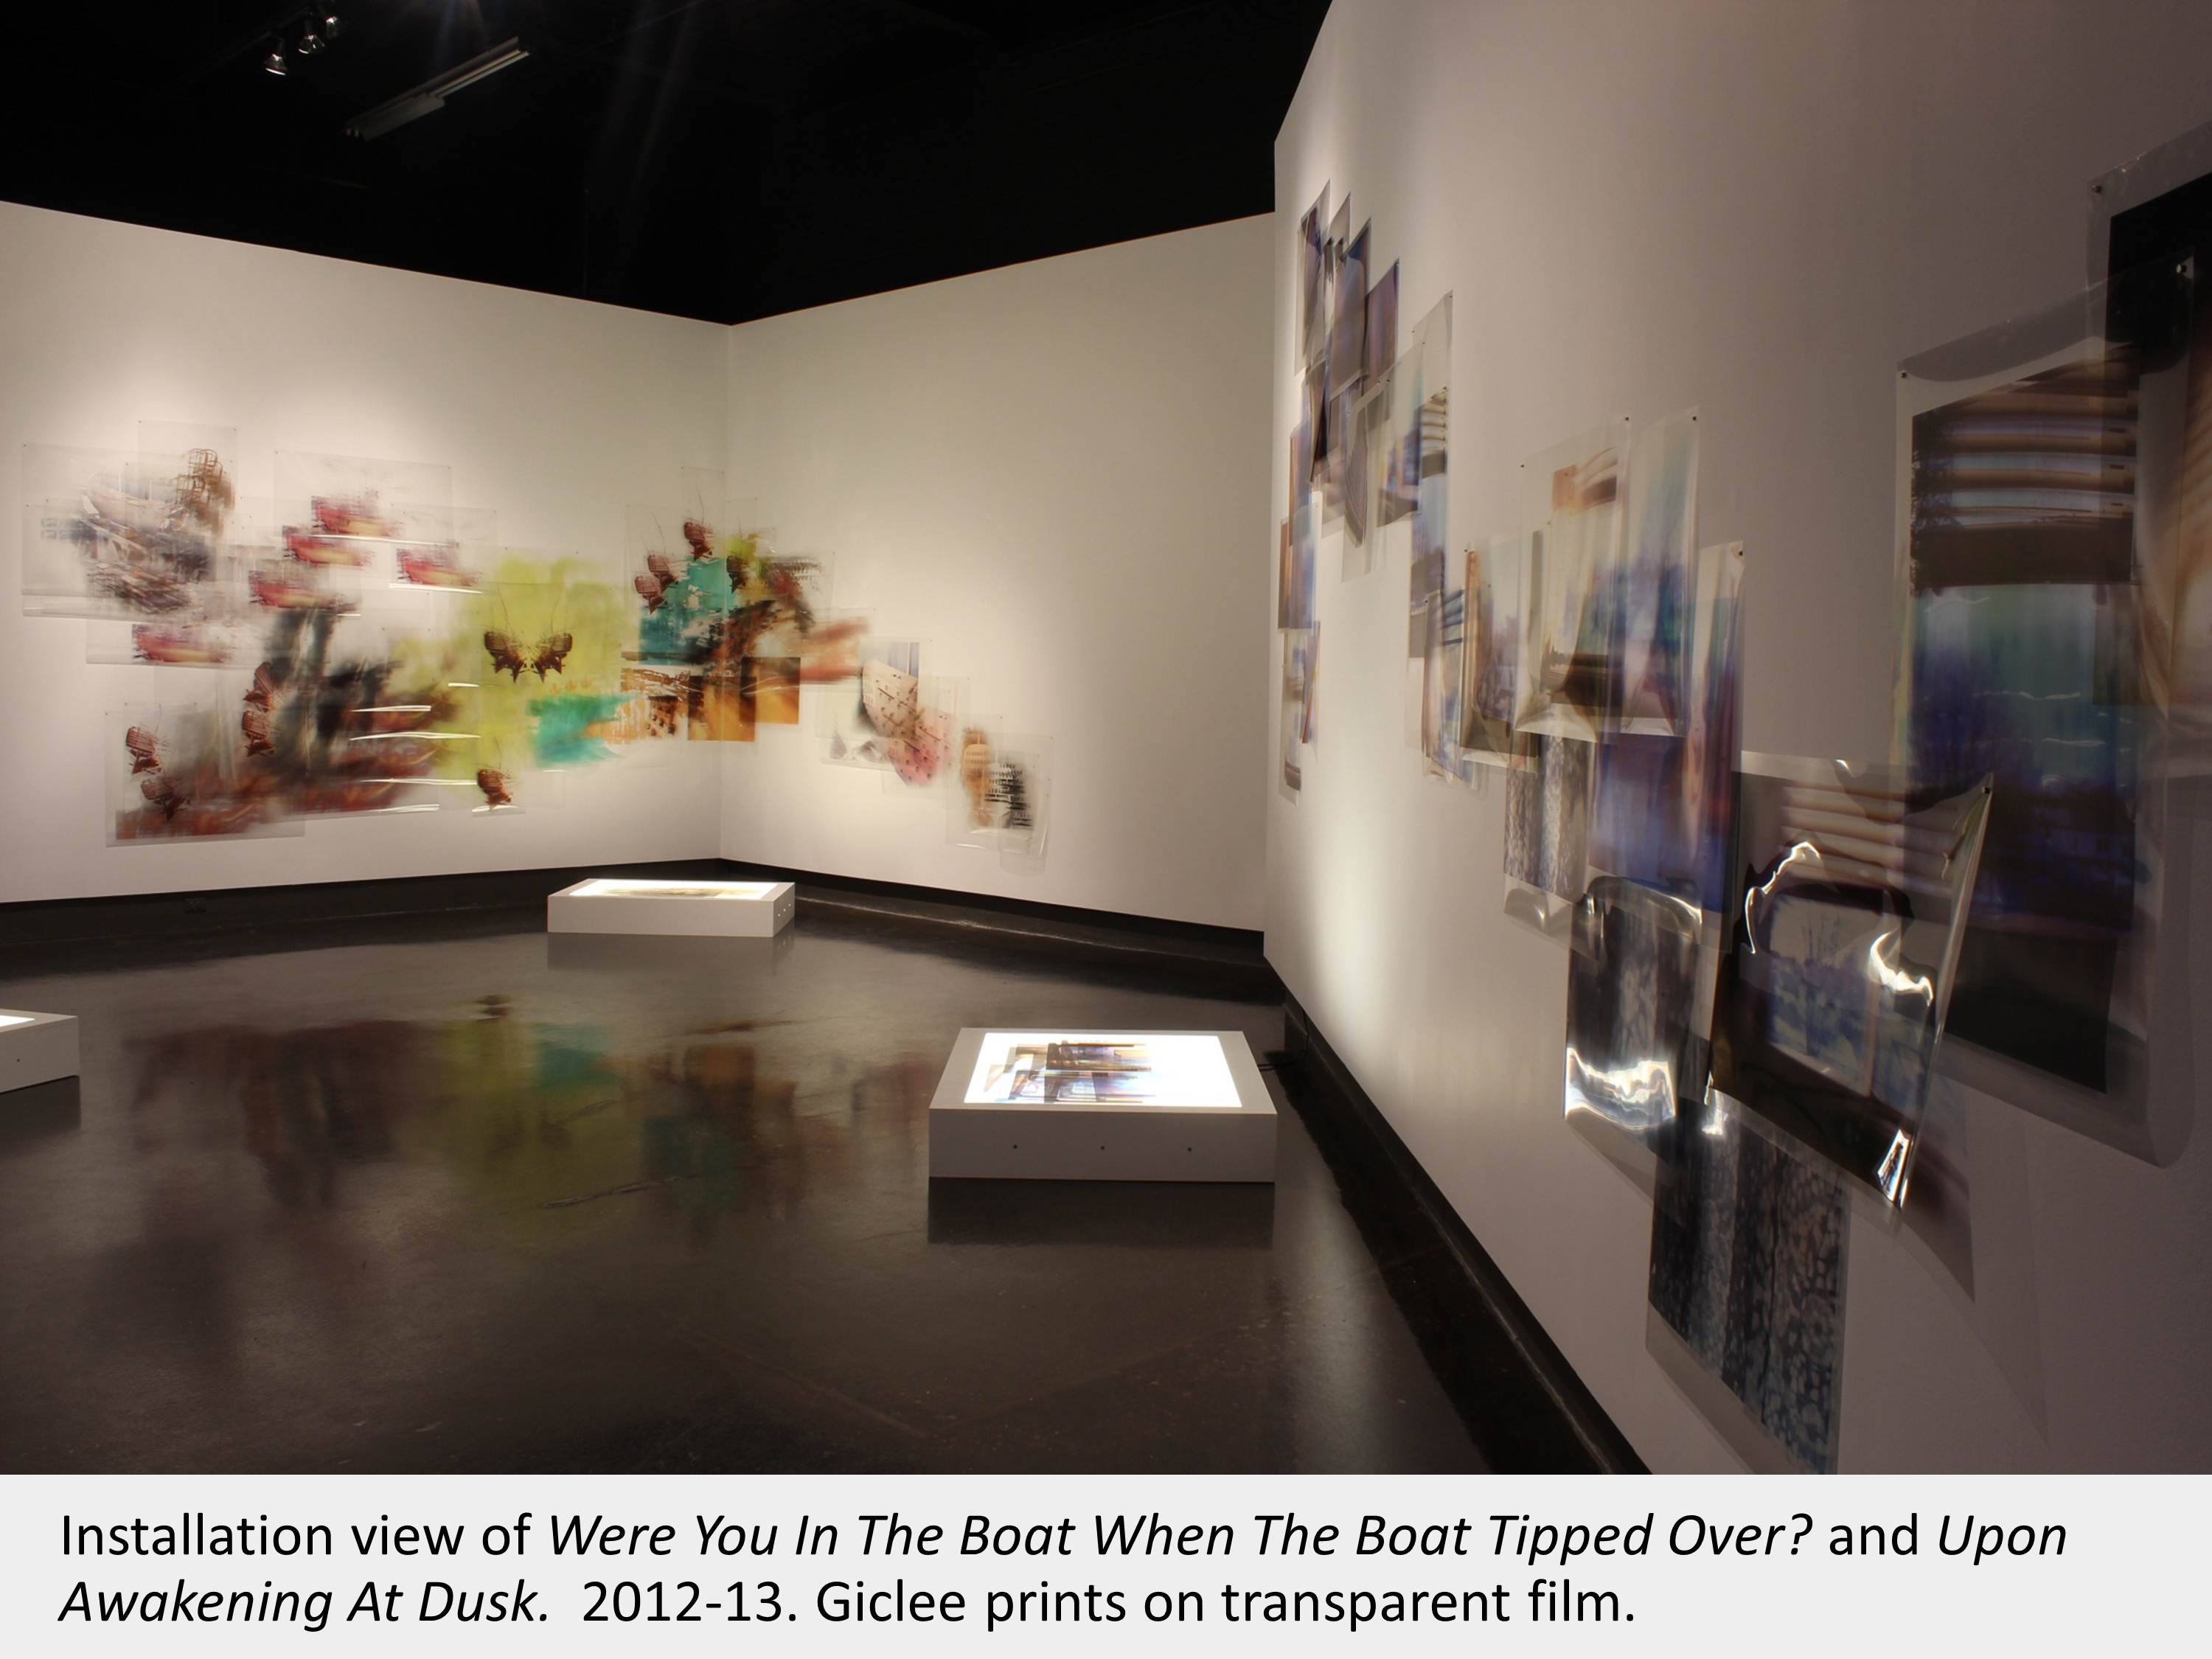 Artwork by Natalie Hunter. Installation view of Were You In The Boat When The Boat Tipped Over? and Upon Awakening At Dusk. 2012